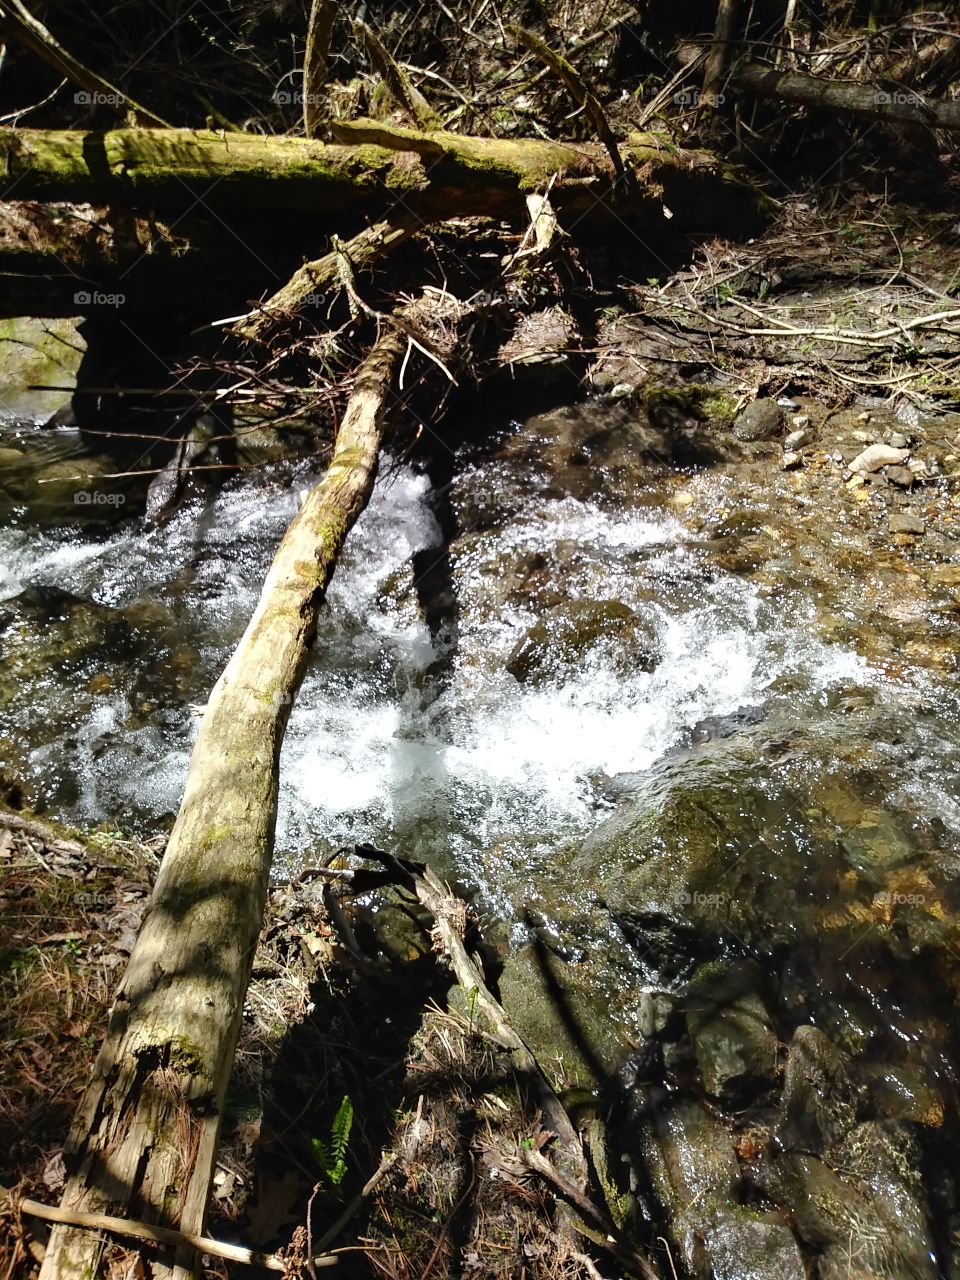 little creeks dot the landscape, water flows and life lives